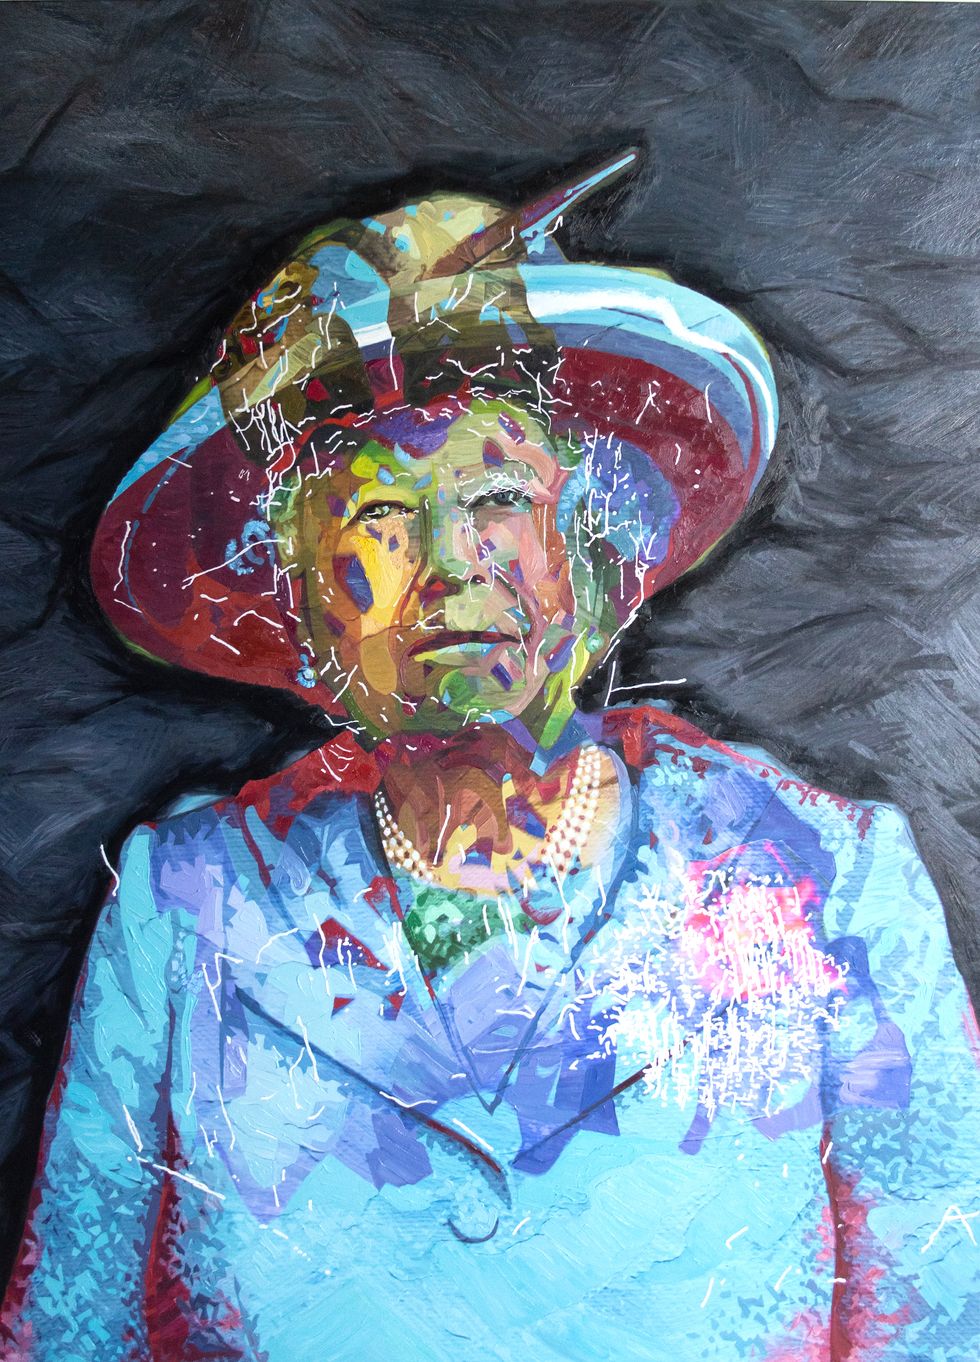 Portrait of the Queen painted by robot artist Ai-Da is unveiled